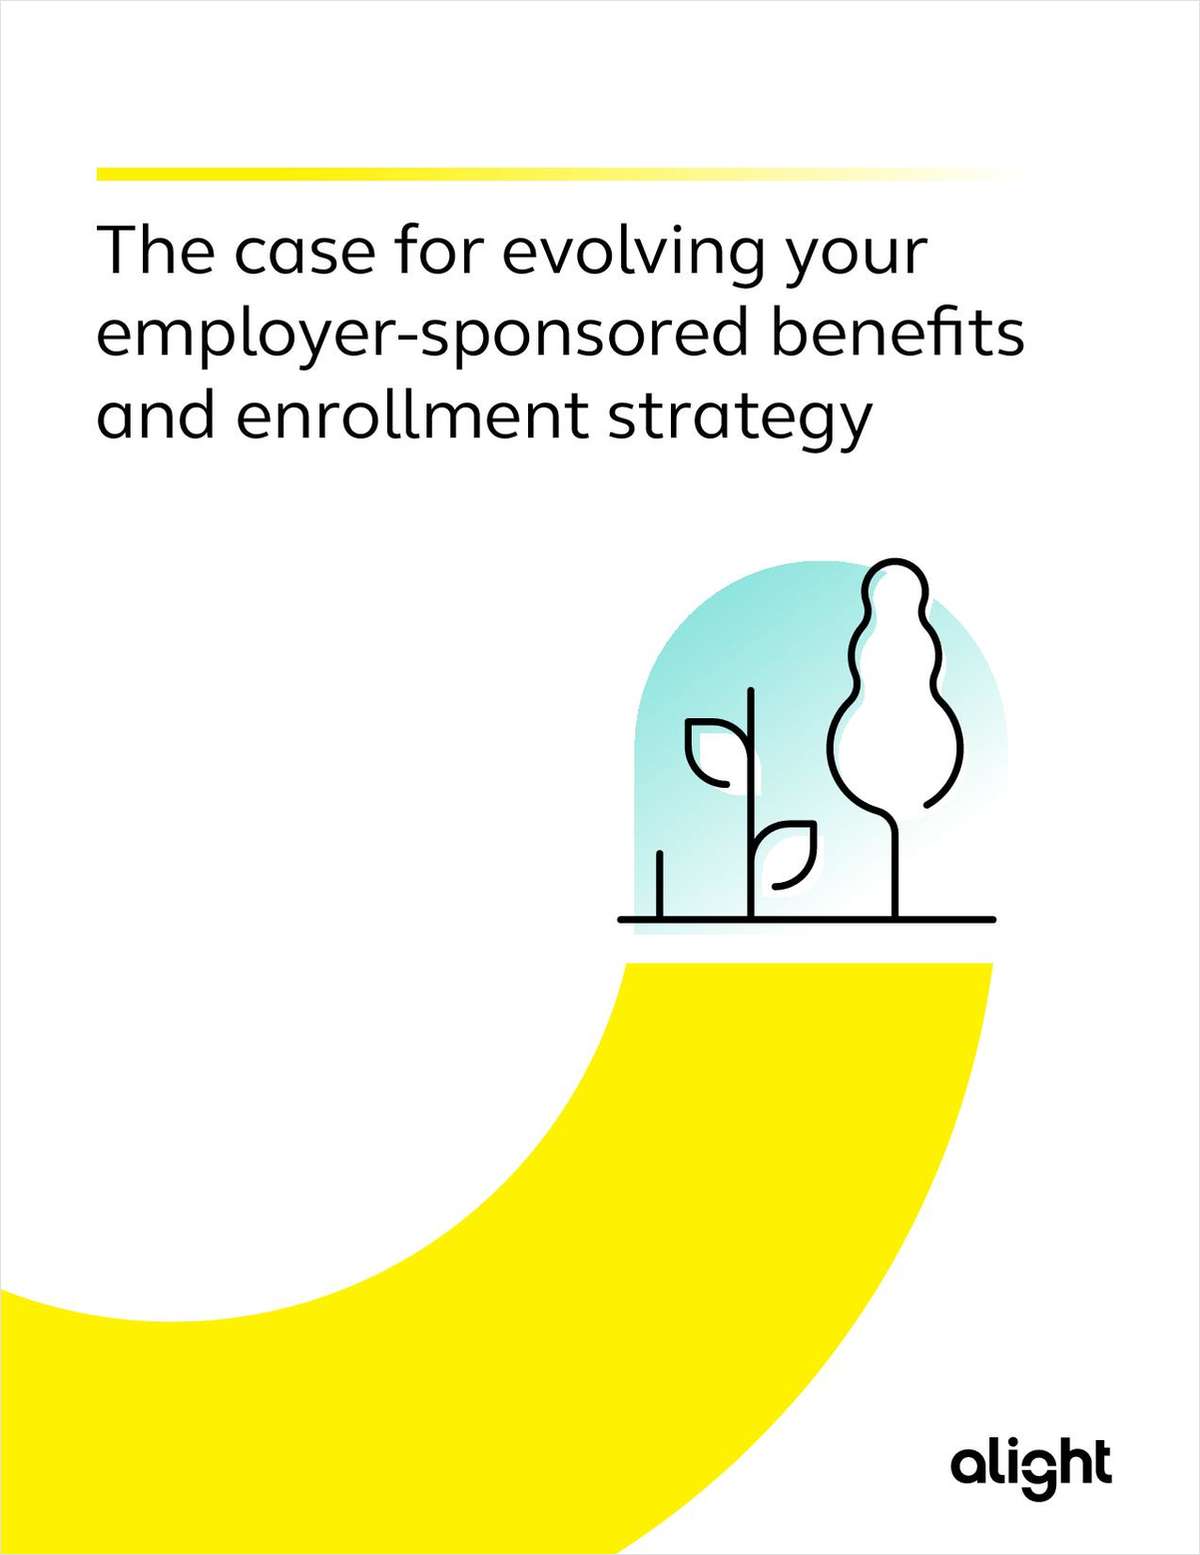 The Case for Evolving Your Employer-Sponsored Benefits & Enrollment Strategy